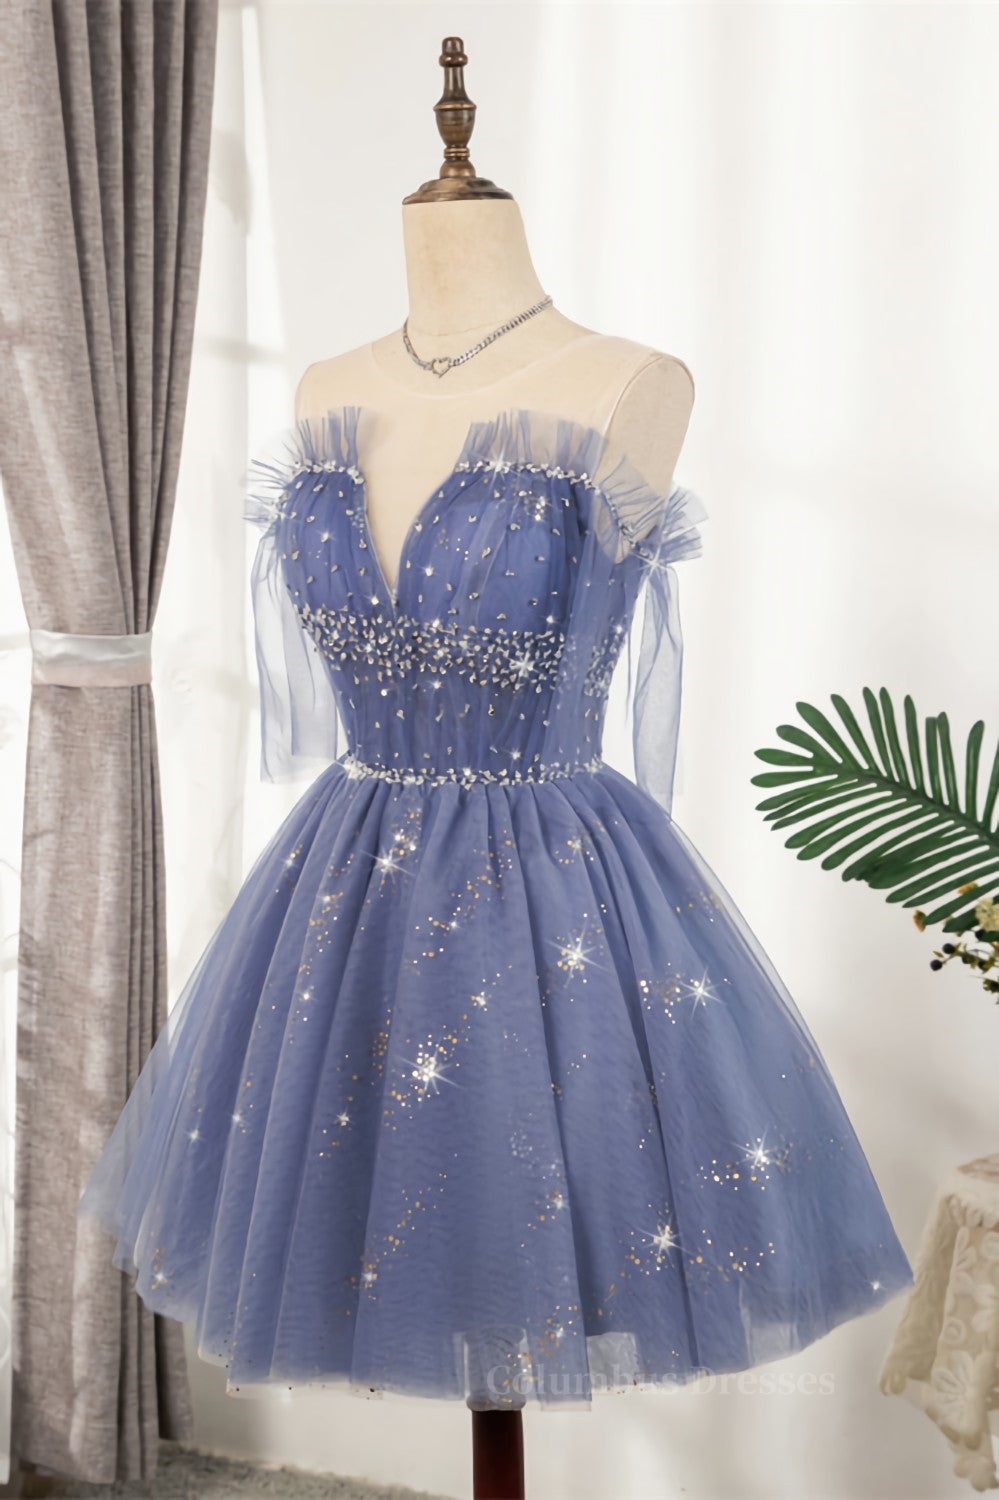 Party Dress Over 88, Diamond Blue Tulle Short Homecoming Dress